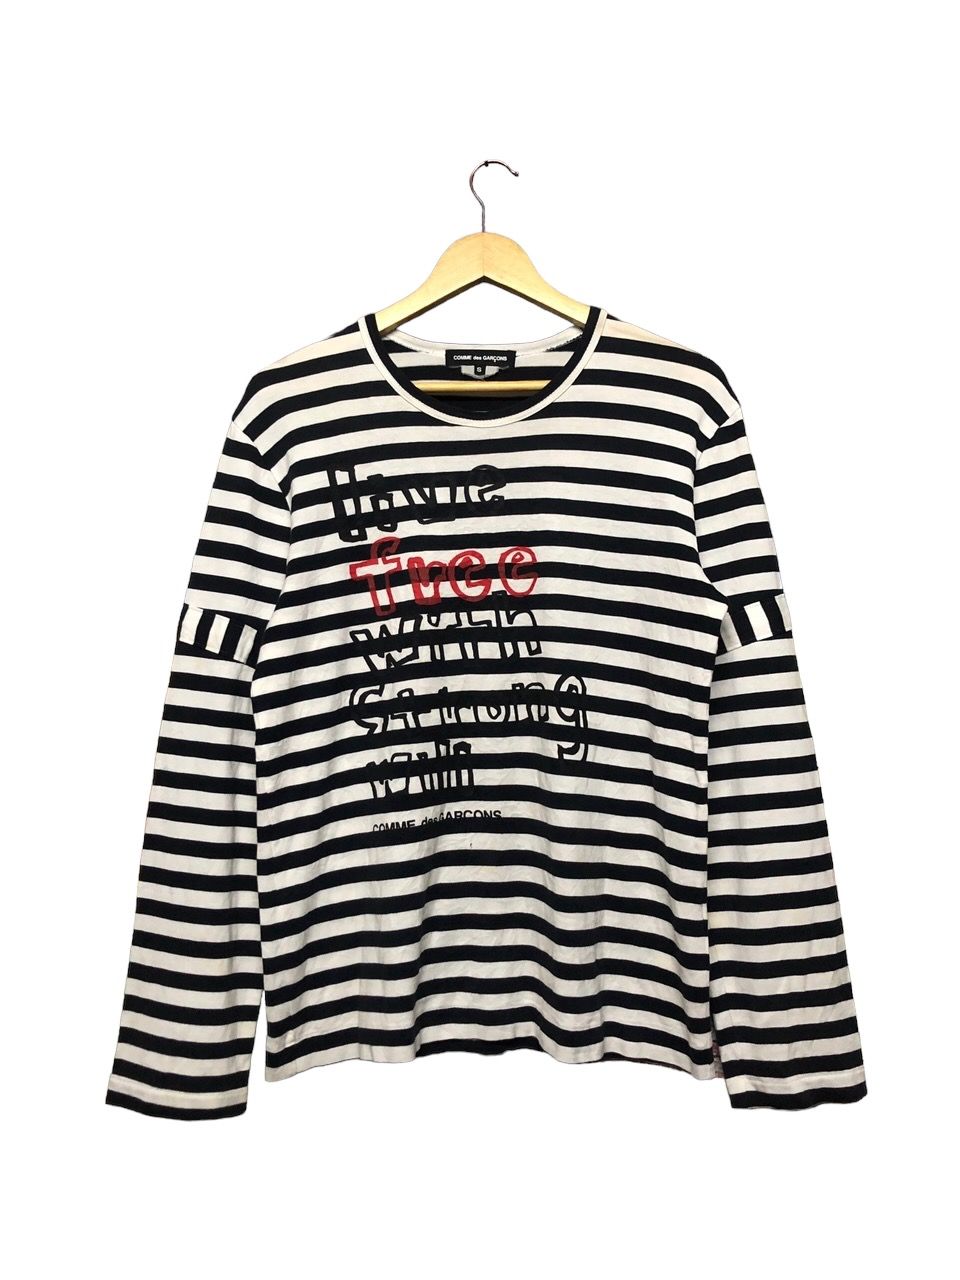 Rare🔥Cdg Poem *Live Free With Strong Wili*Striped Tee - 2